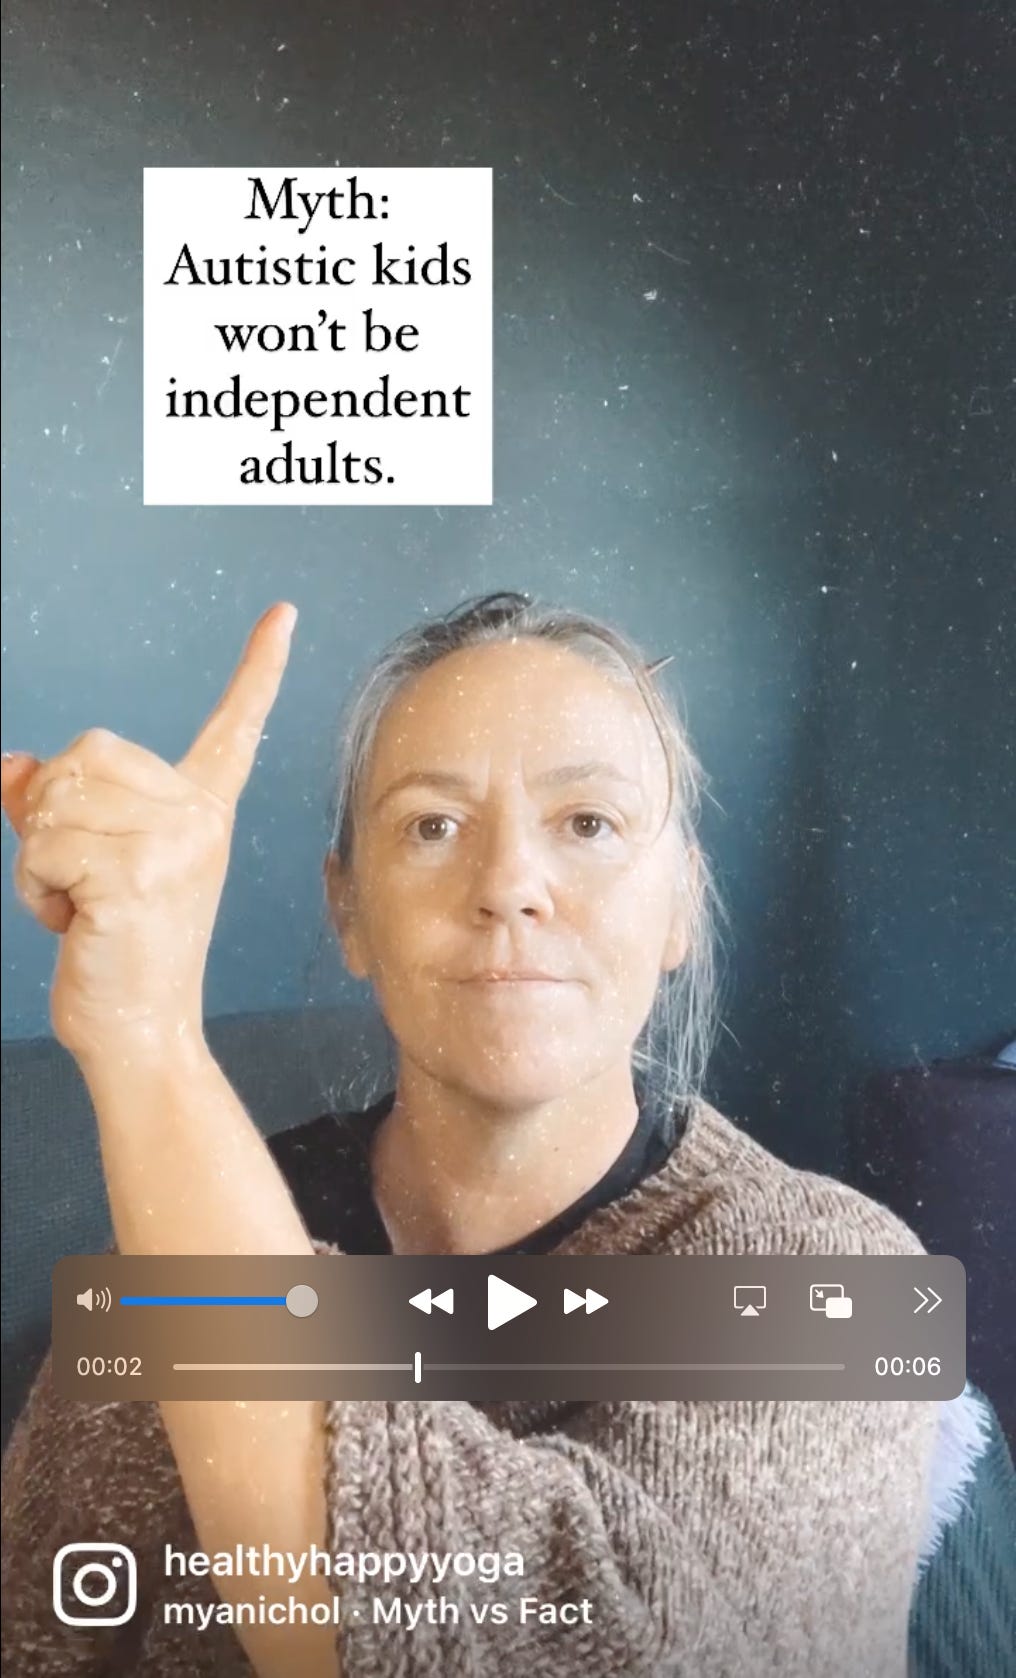 Kate Lynch with caption: “Myth: Autistic kids won’t be independent adults.”